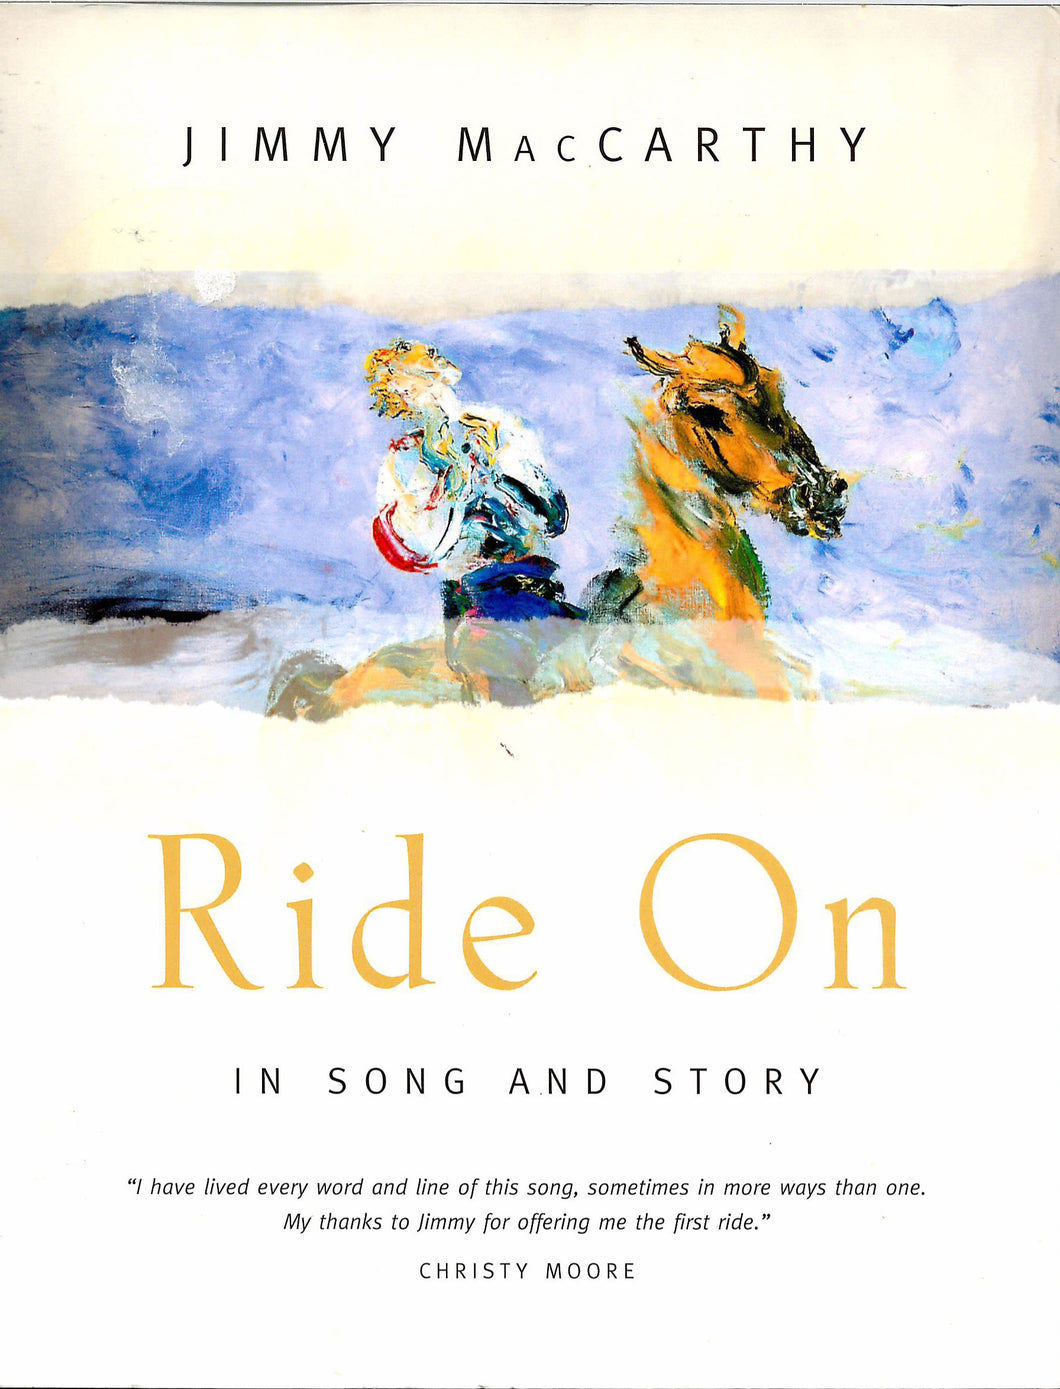 Ride on: In Song and Story